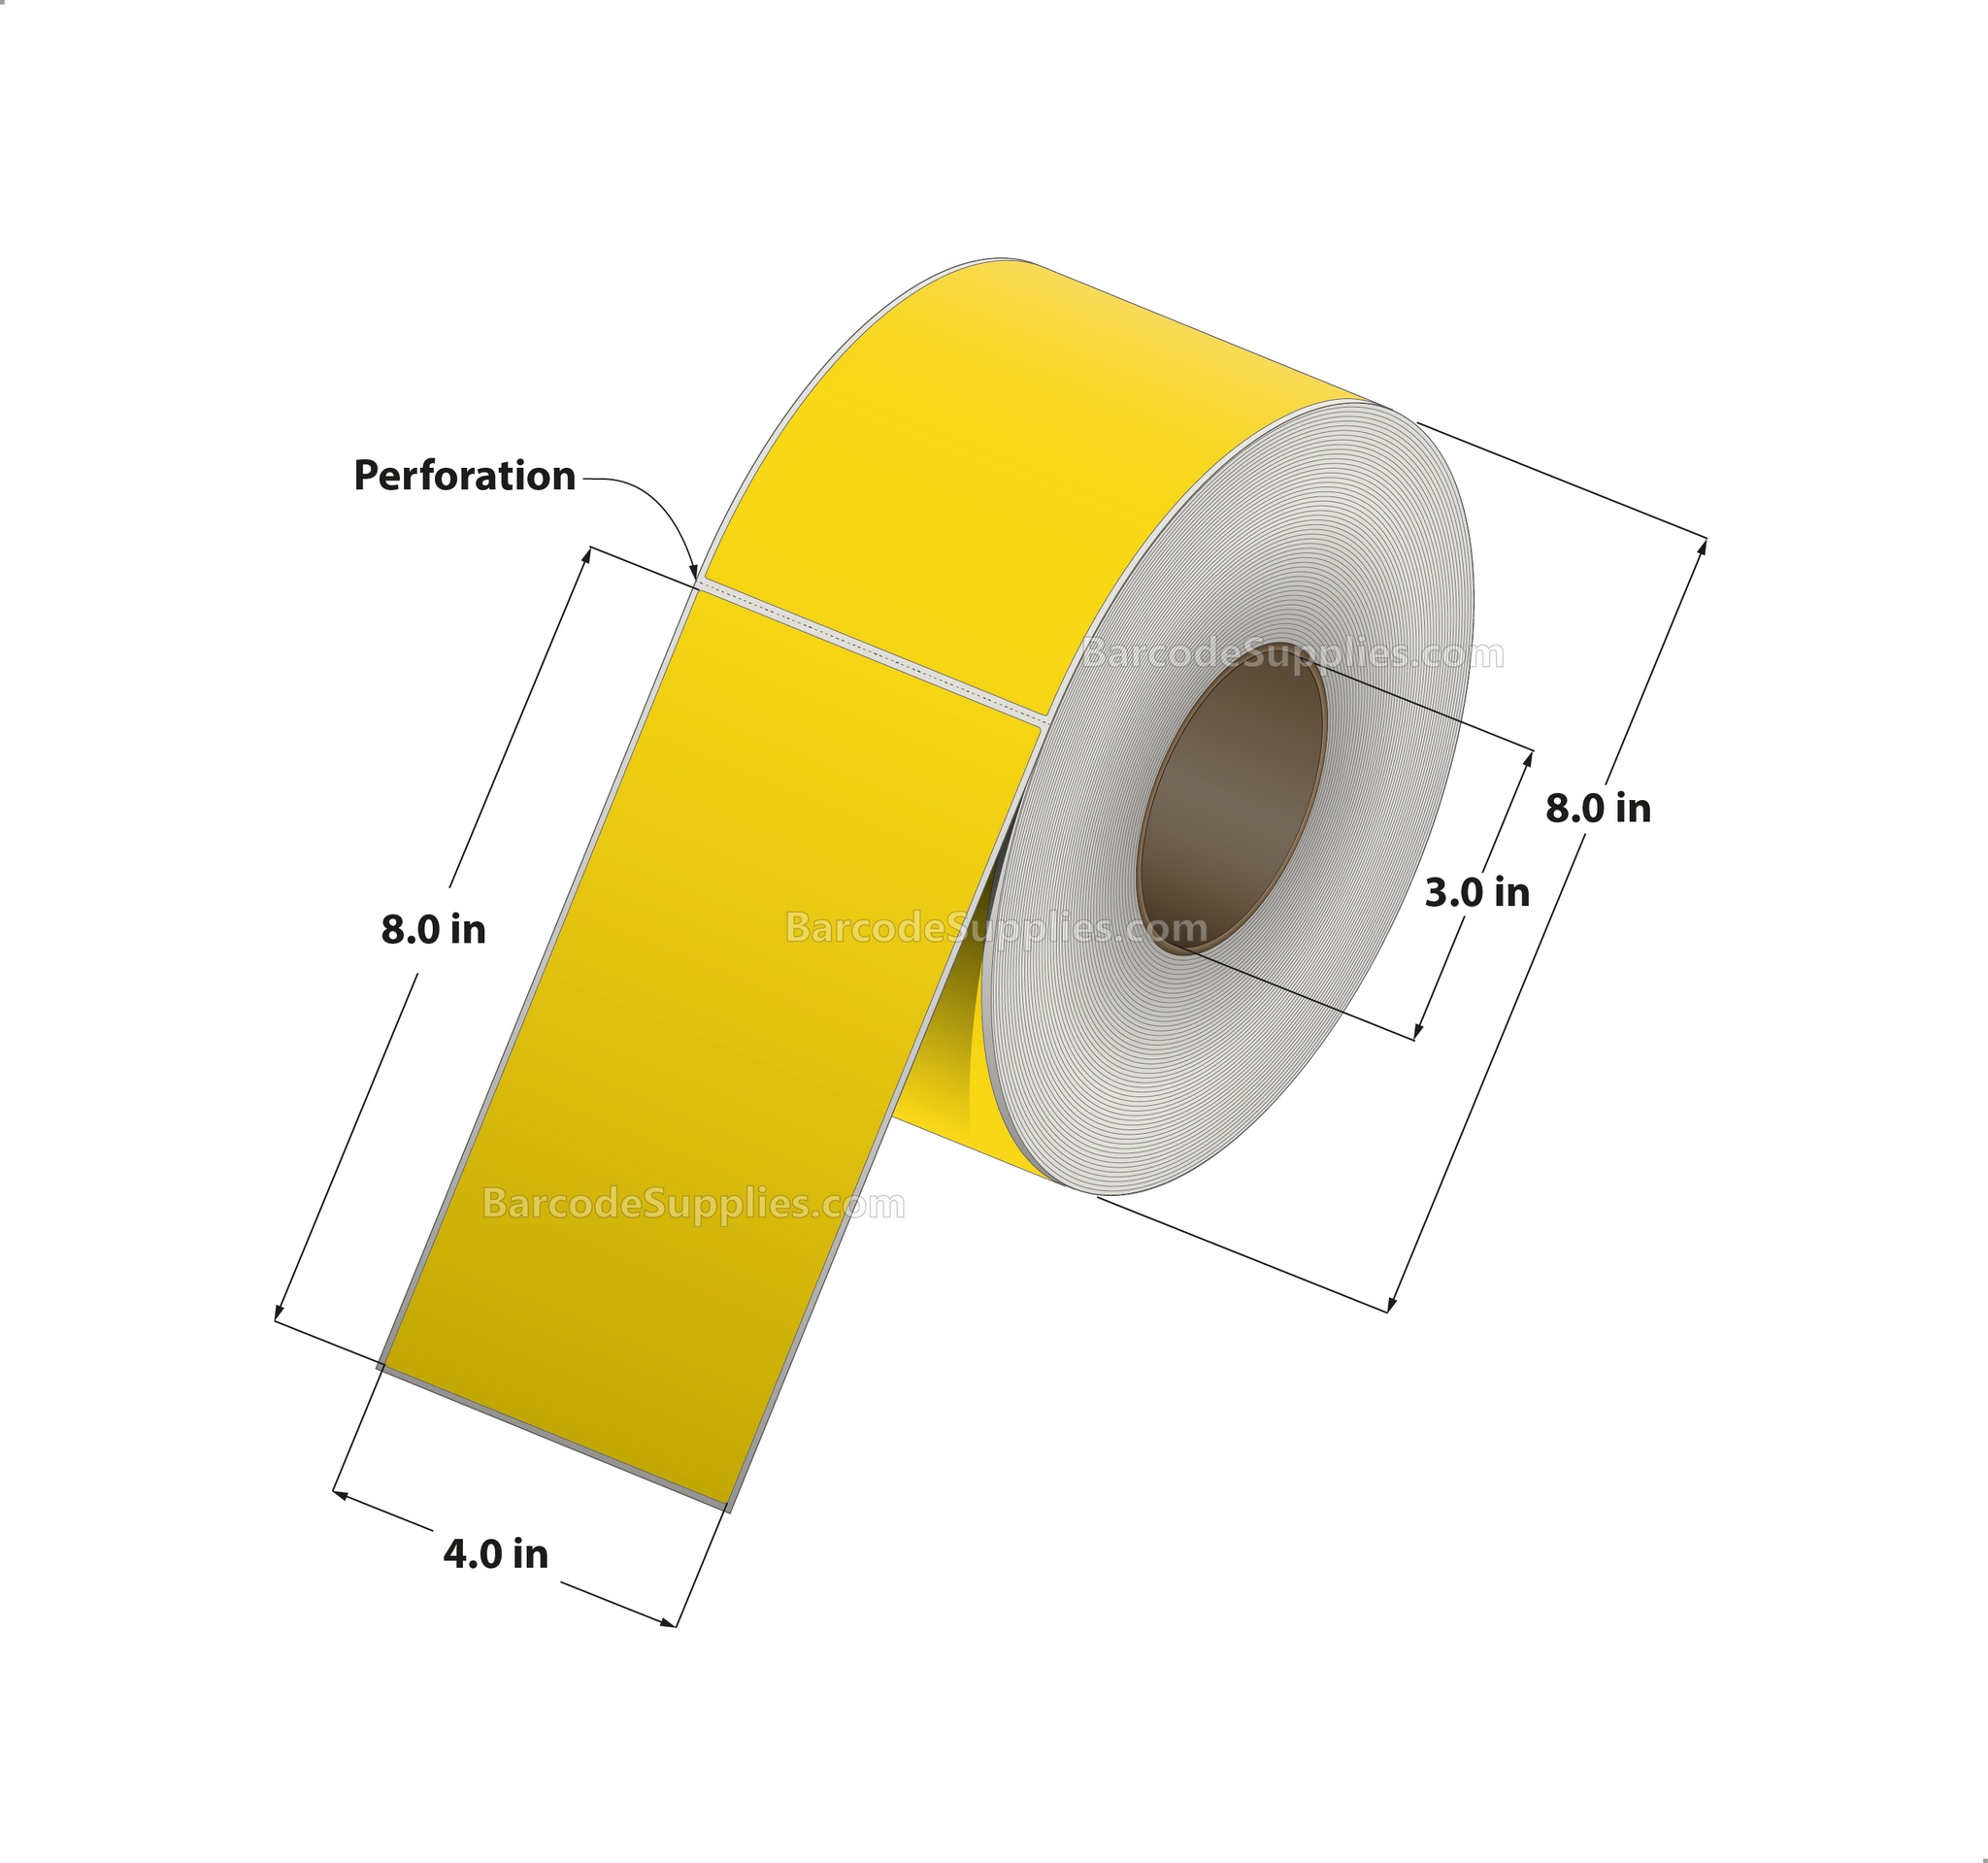 4 x 8 Thermal Transfer Pantone Yellow Labels With Permanent Adhesive - Perforated - 750 Labels Per Roll - Carton Of 4 Rolls - 3000 Labels Total - MPN: RFC-4-8-750-YL